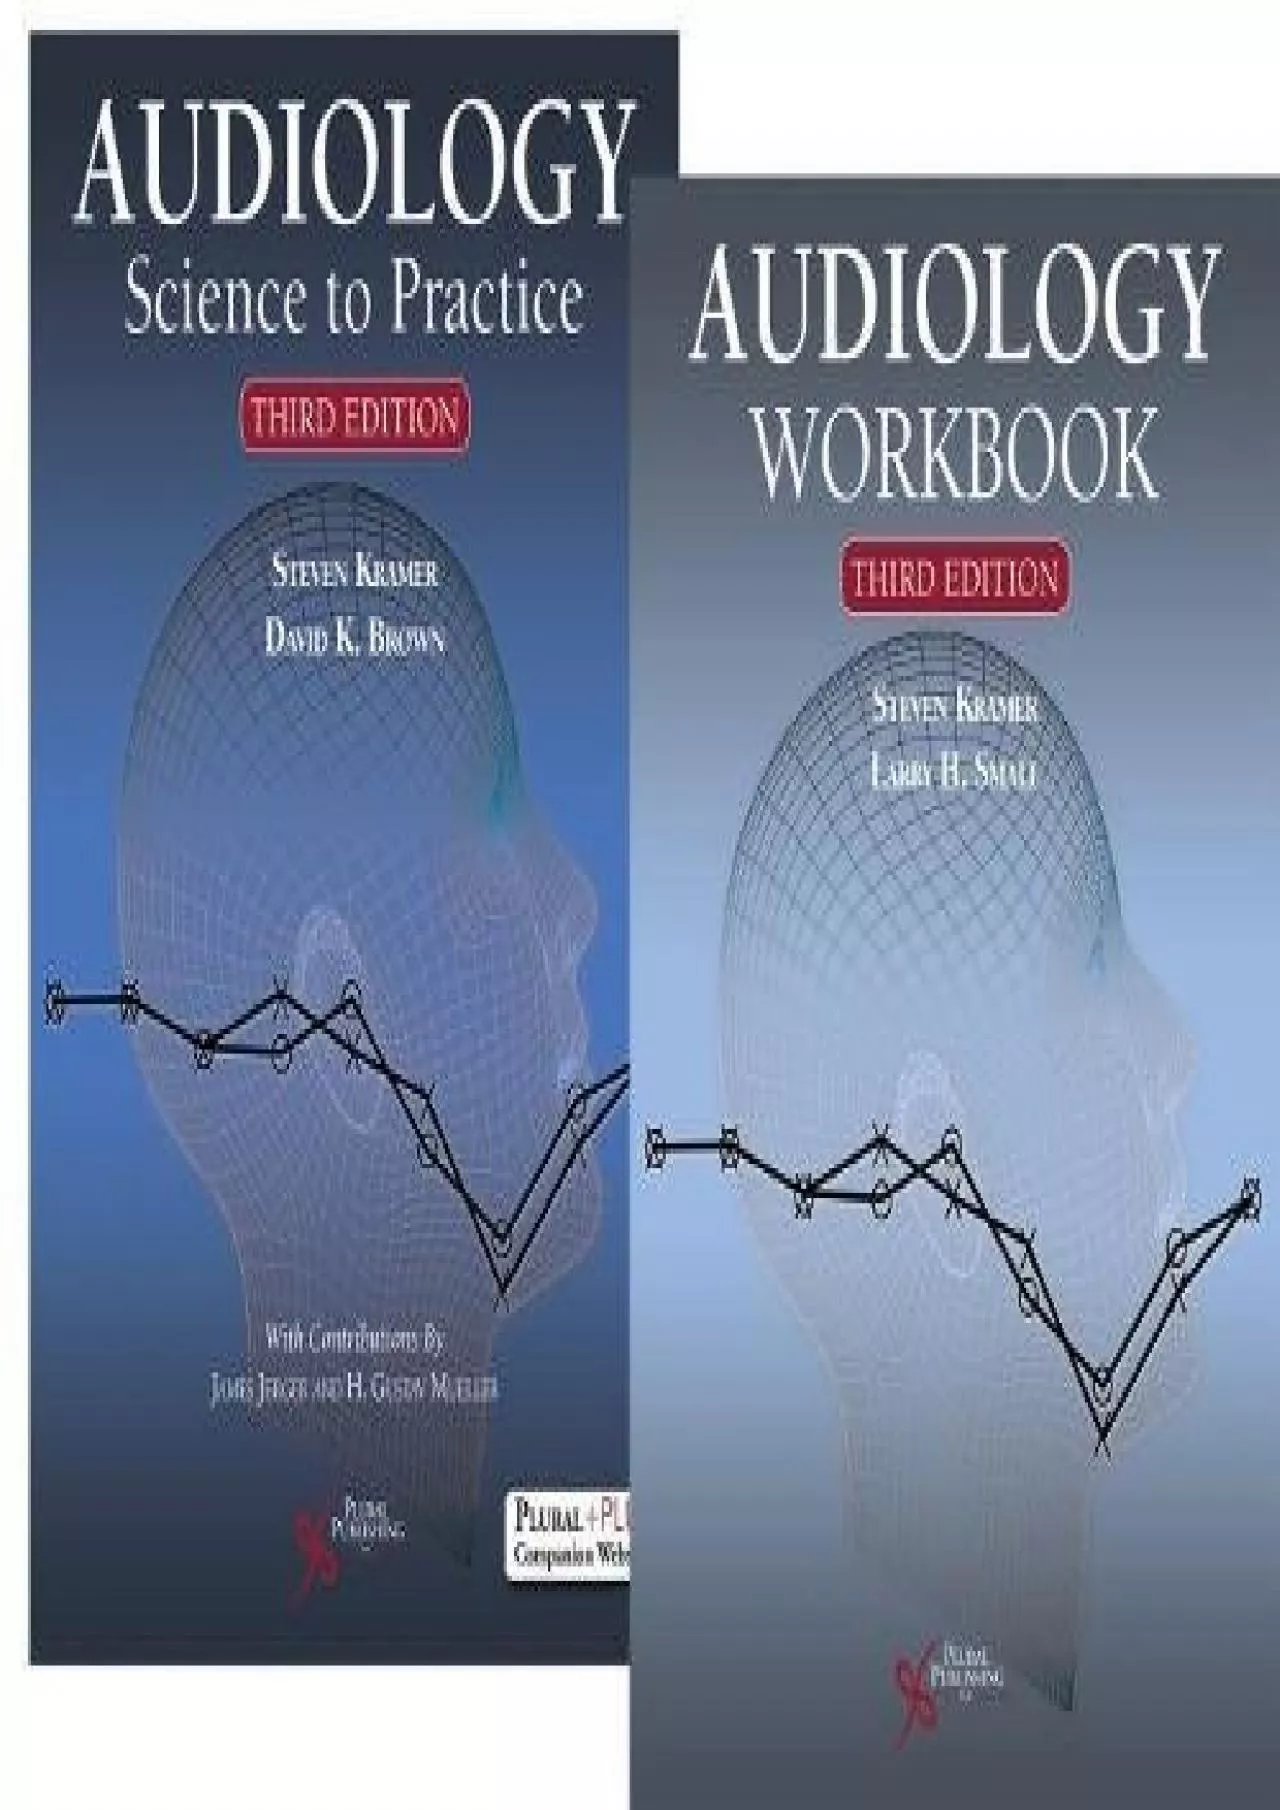 (BOOK)-Audiology: Science to Practice Bundle (Textbook + Workbook), Third Edition